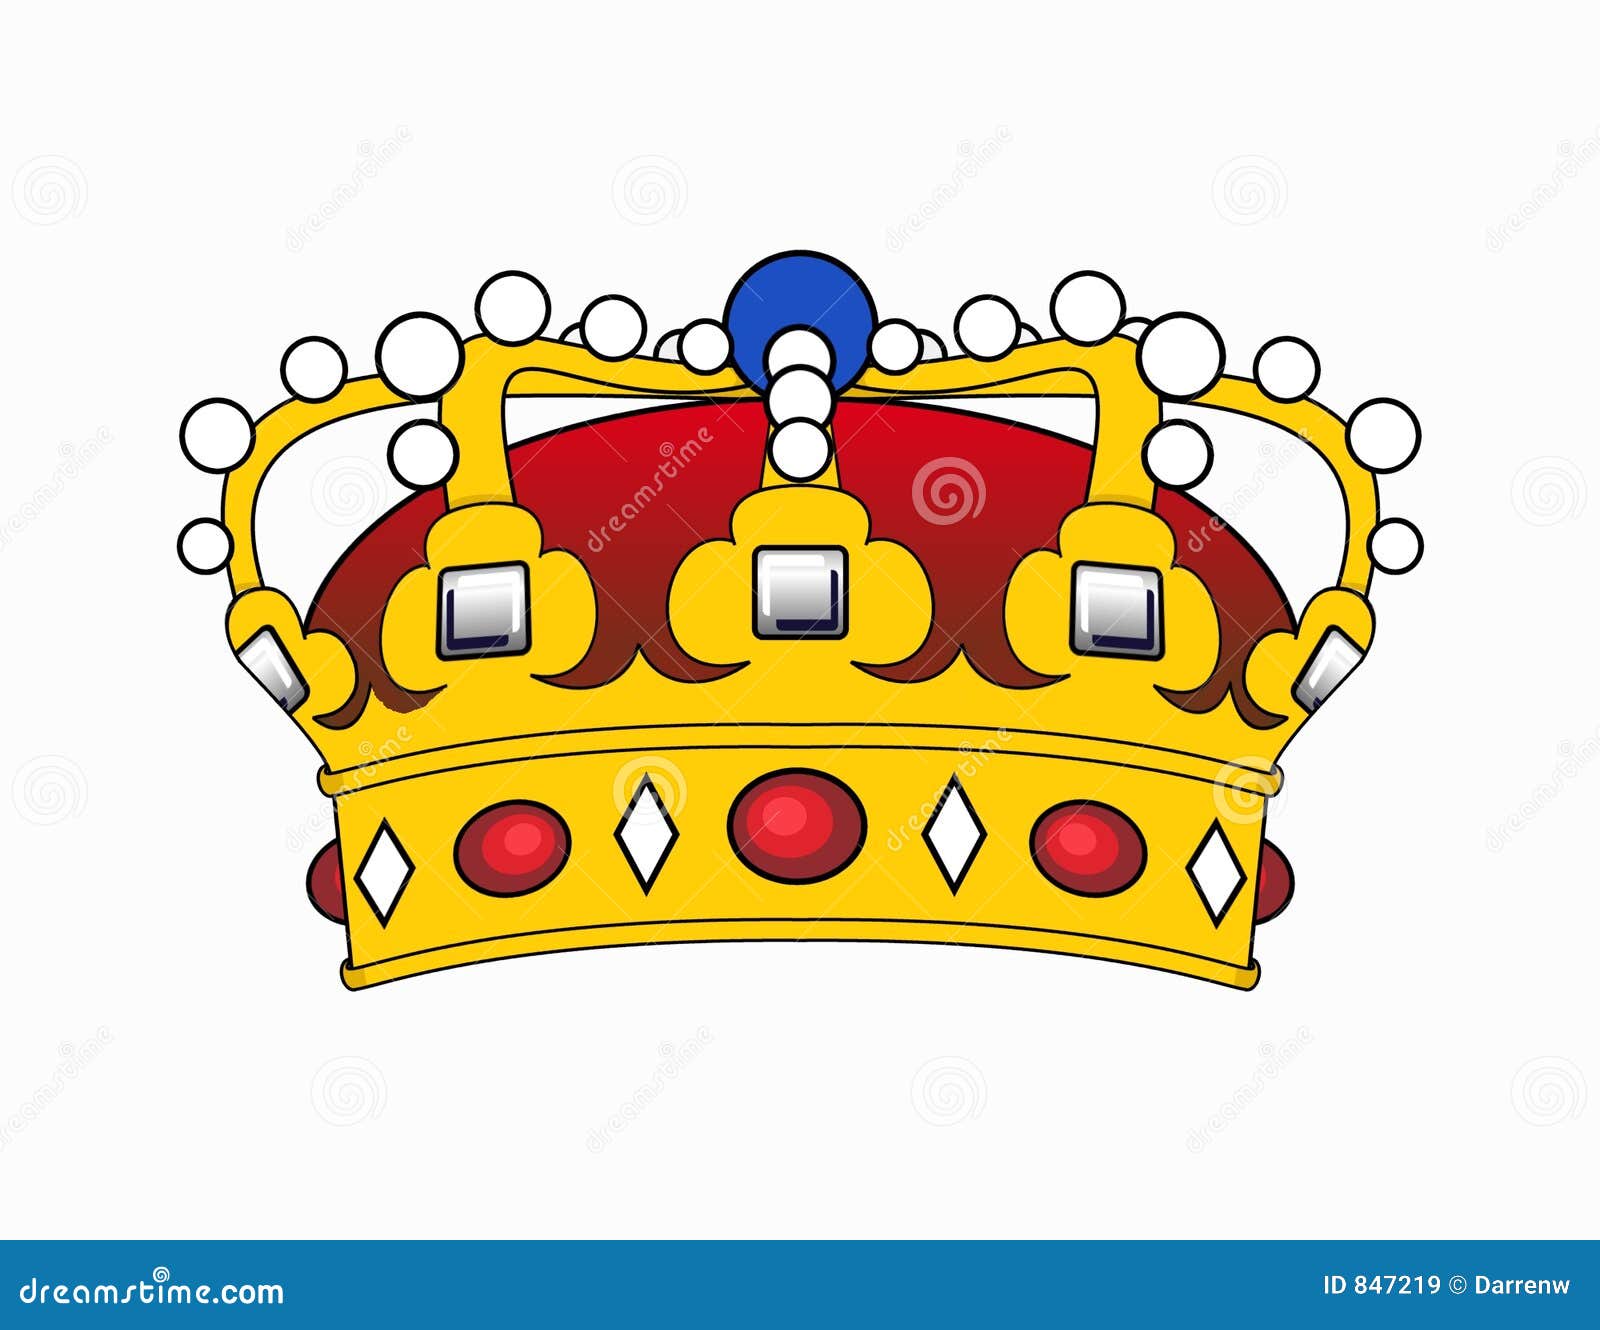 crown jewels clipart - photo #24